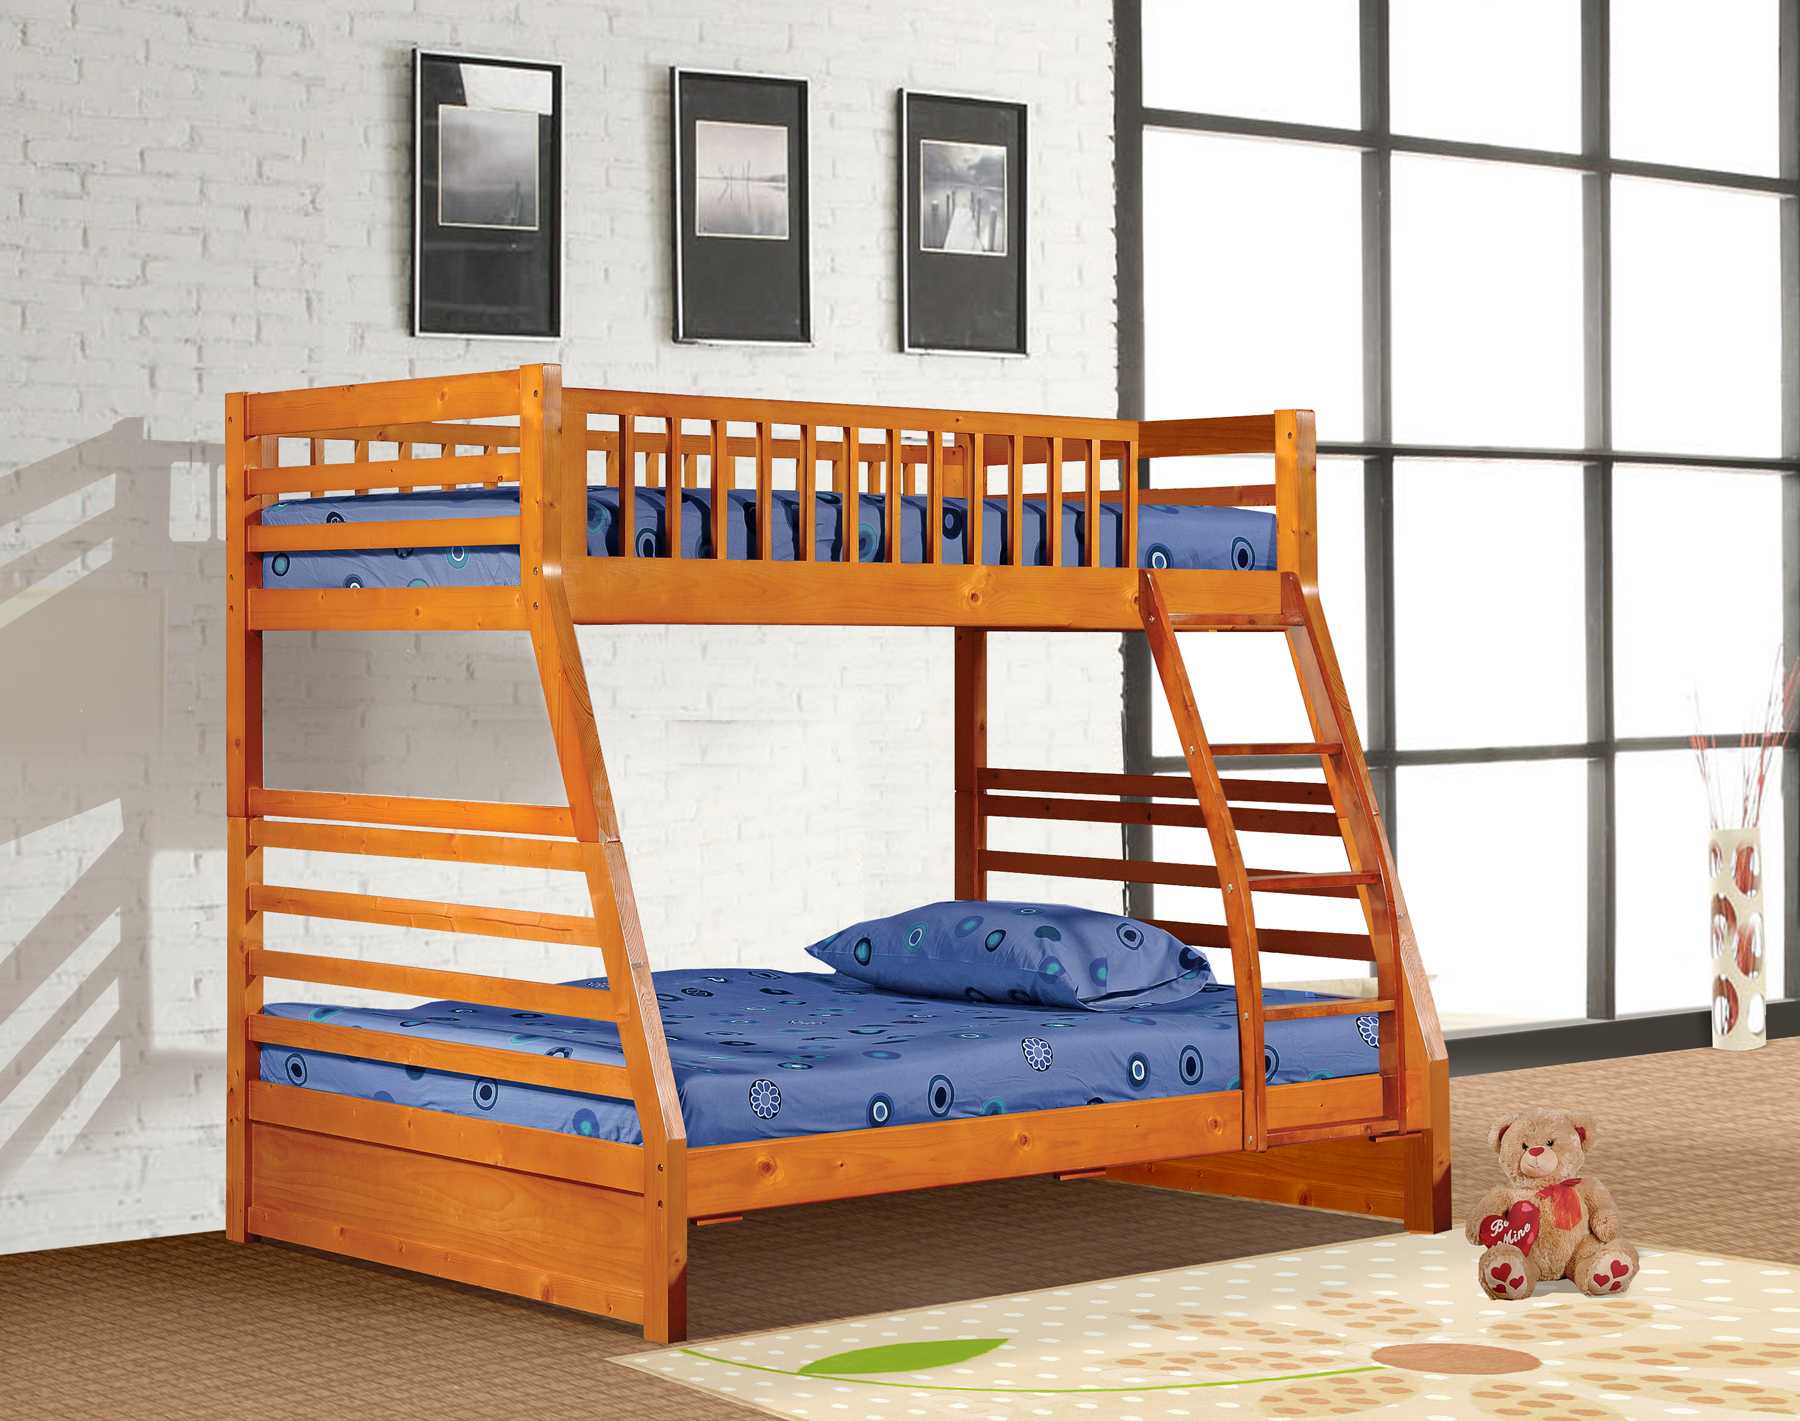 78.75" X 42.5-57.25" X 65" Oak Manufactured Wood and Solid Wood Twin or Full Bunk Bed